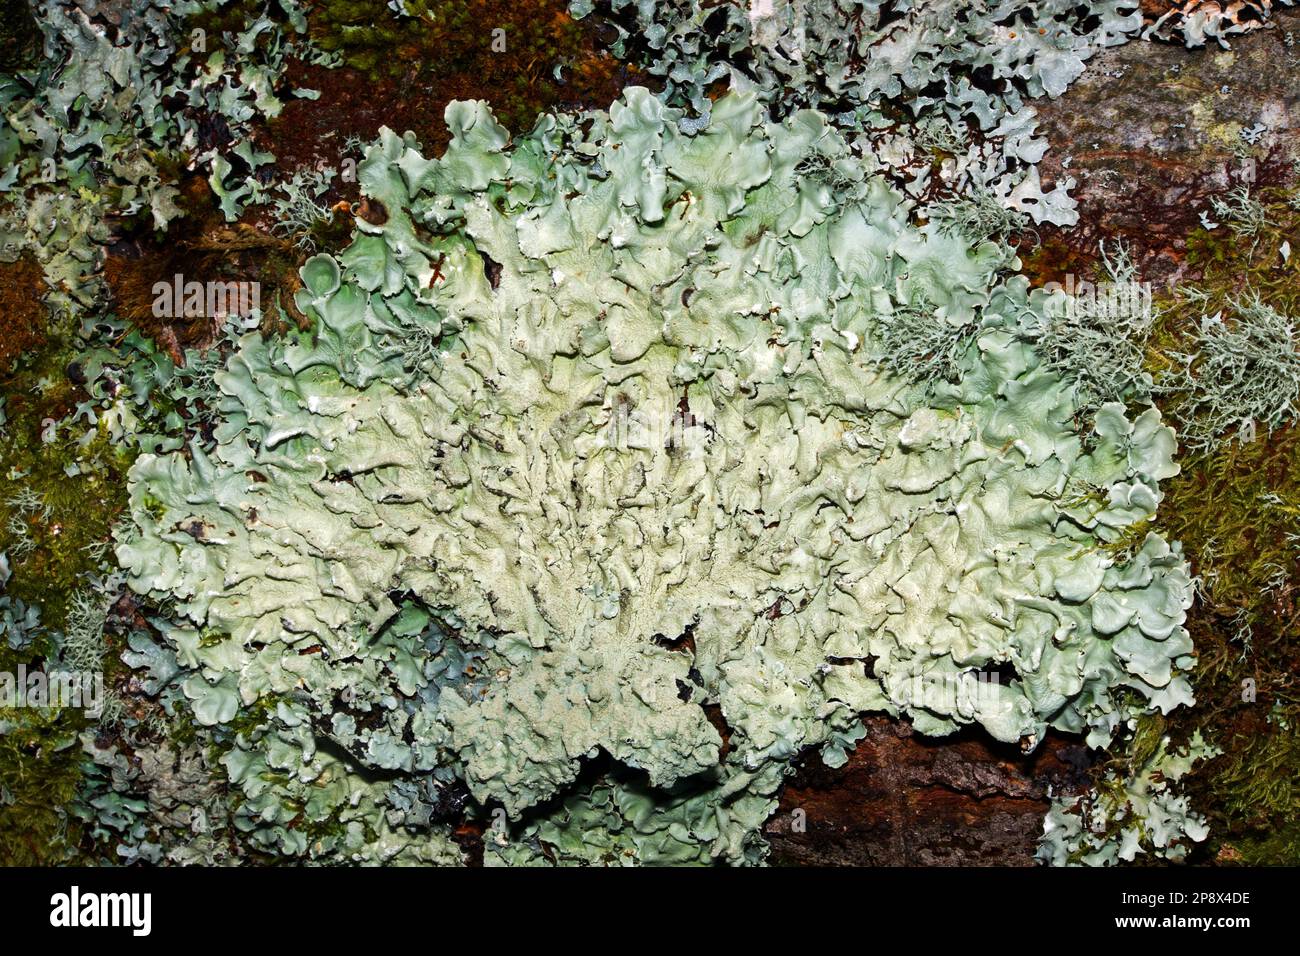 Flavoparmelia caperata (common greenshield lichen) grows on tree bark and occasionally on rocks. It occurs in temperate forests worldwide. Stock Photo